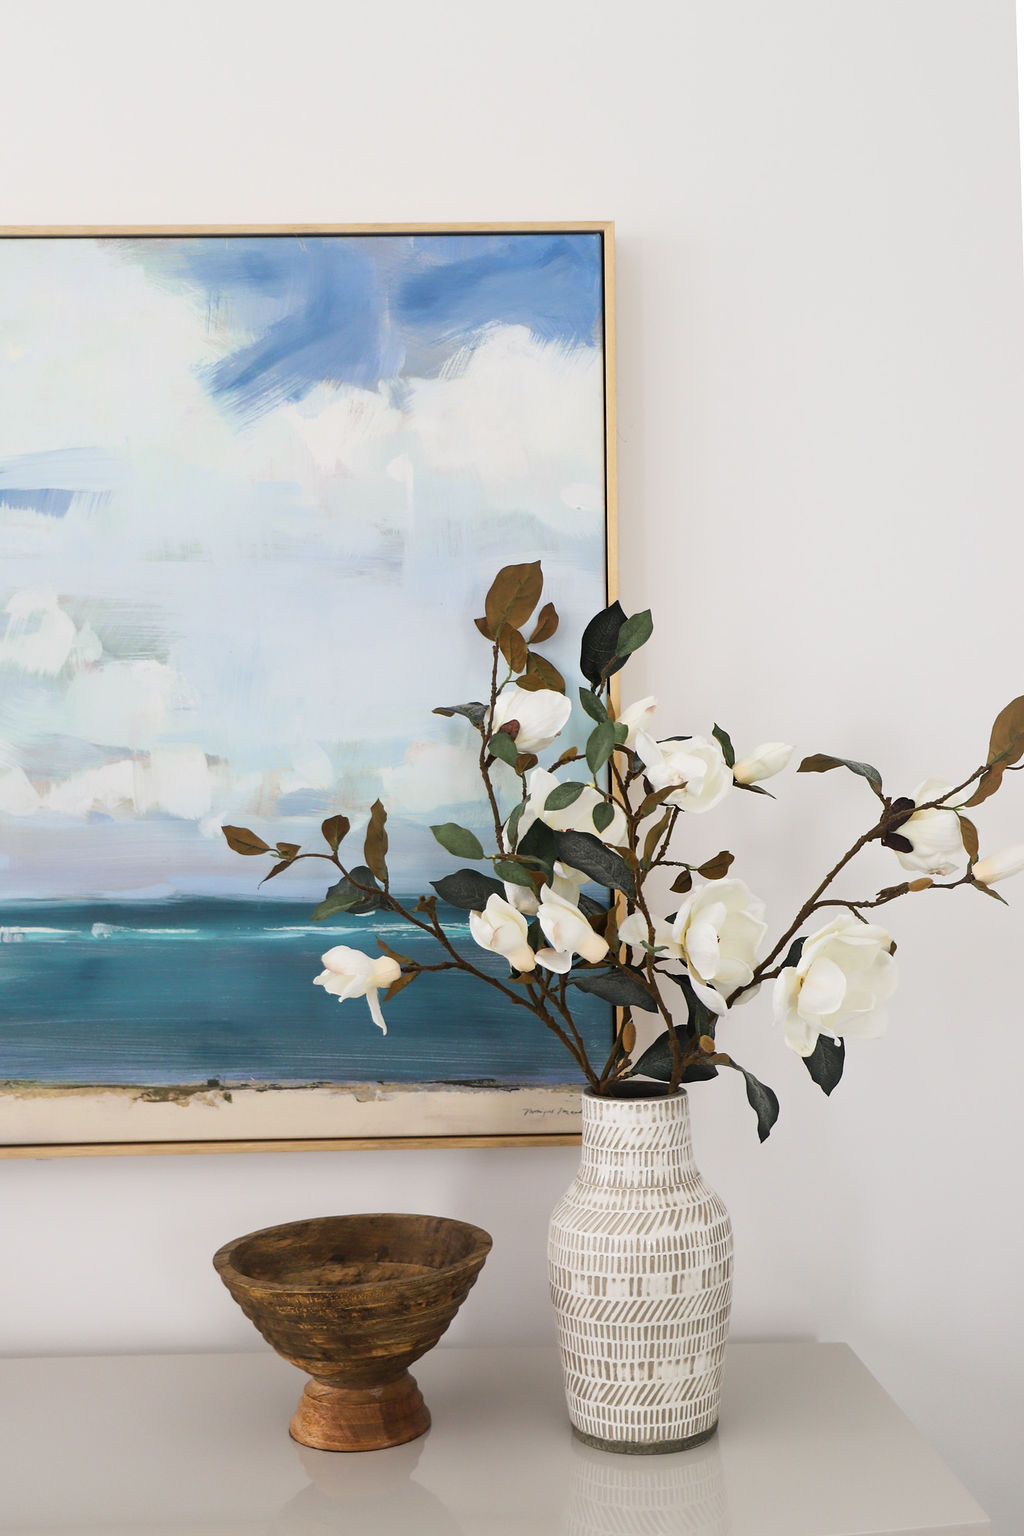 A ceramic vase of magnolia stems and a wooden bowl sit on top a shelf. A painting of the ocean is hung behind the items.